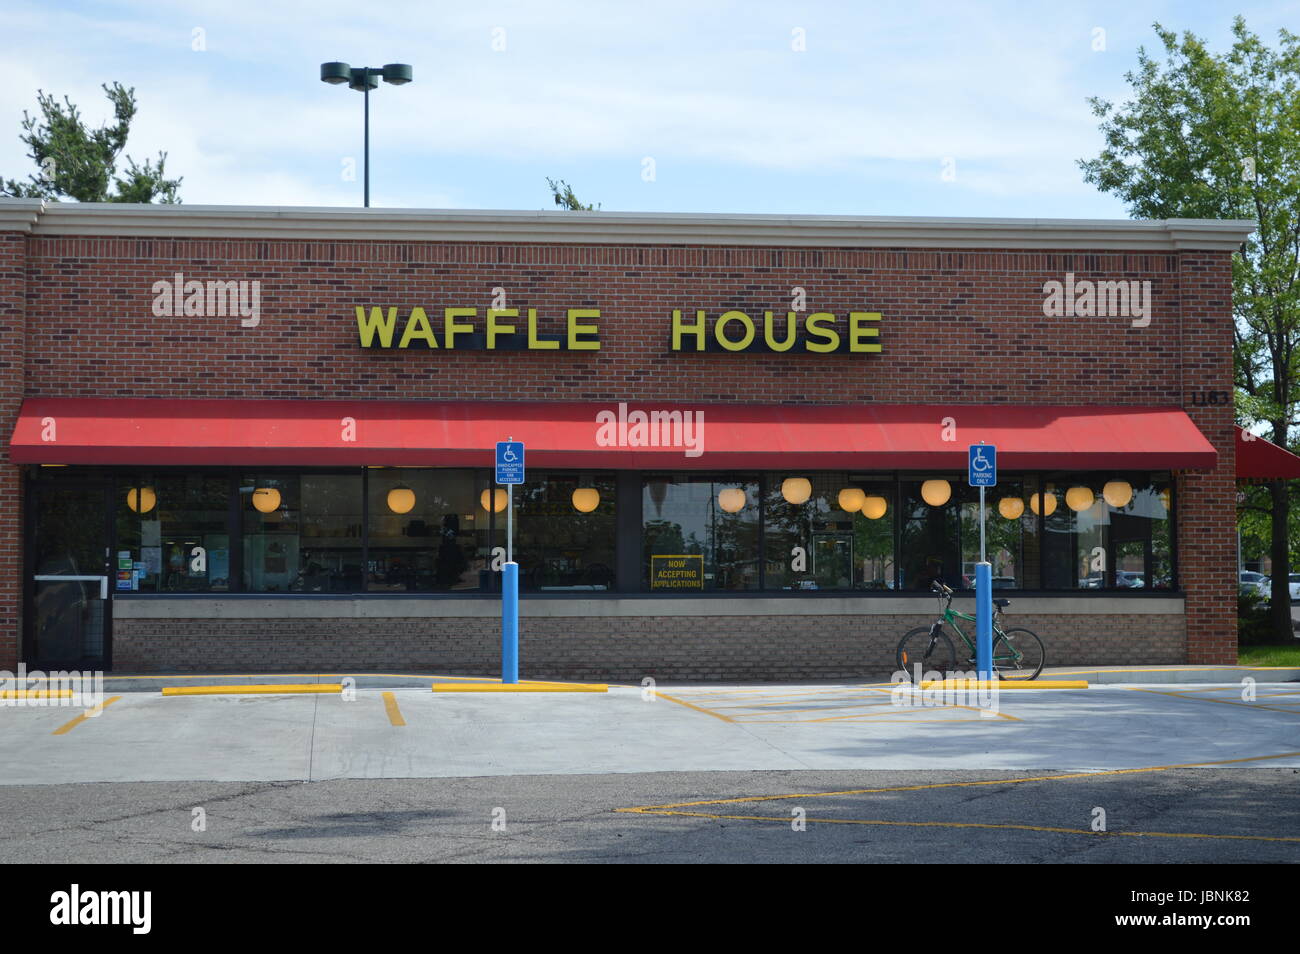 WAFFLE HOUSE Banque D'Images